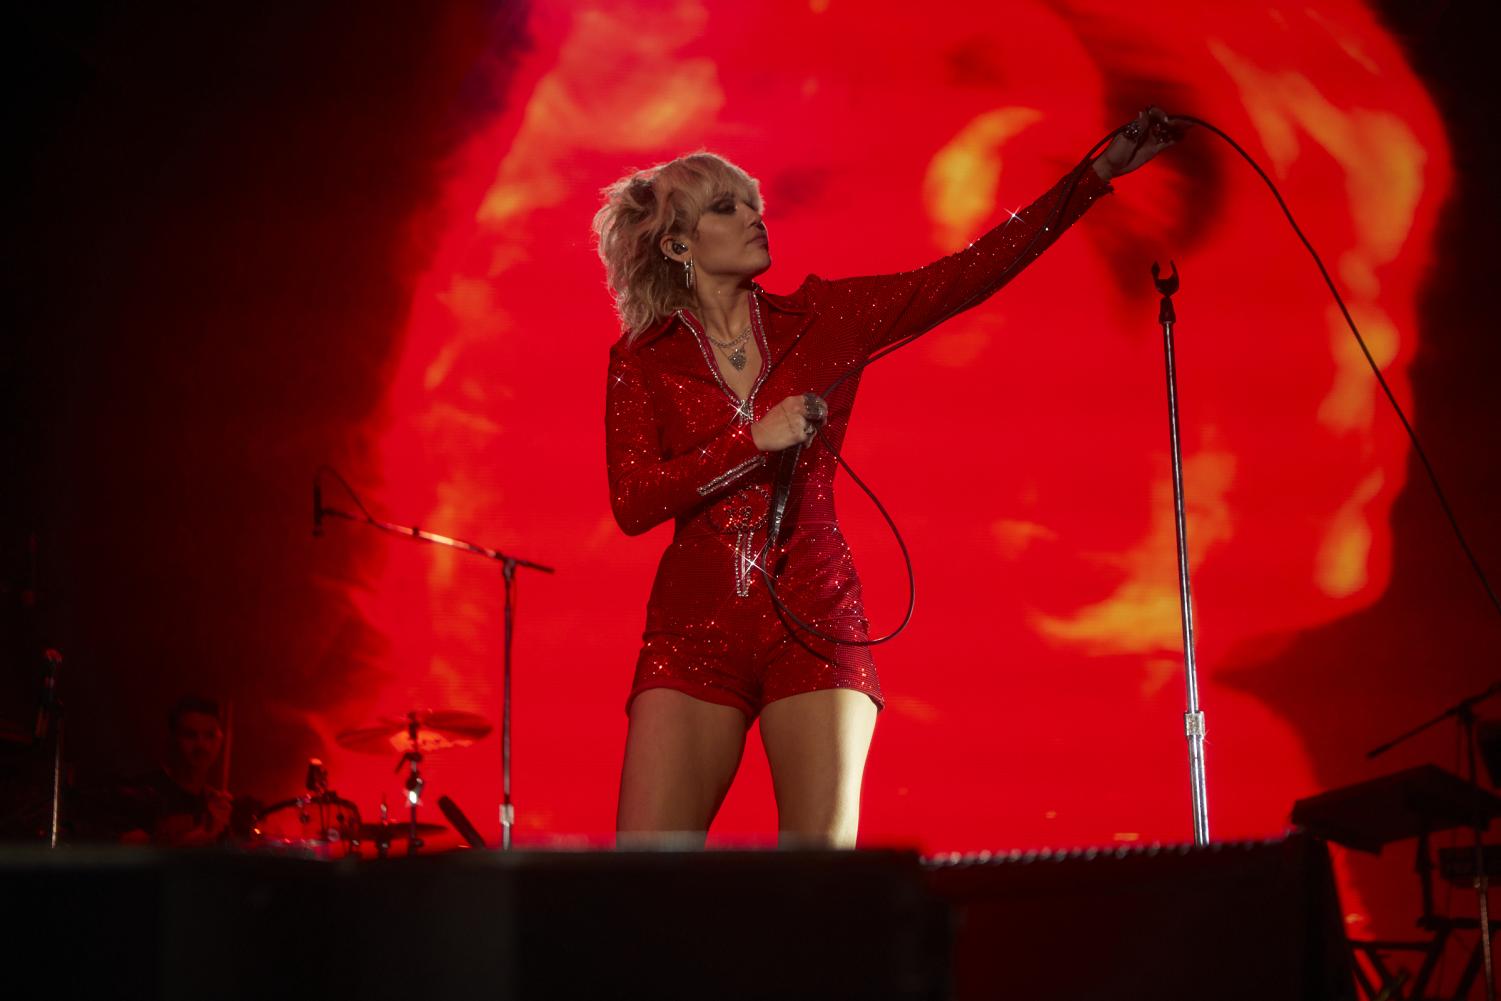 Miley+Cyrus%2C+wearing+a+red+sequined+jumpsuit%2C+looks+out+into+the+crowd%2C+arm+extended%2C+while+holding+her+mic.